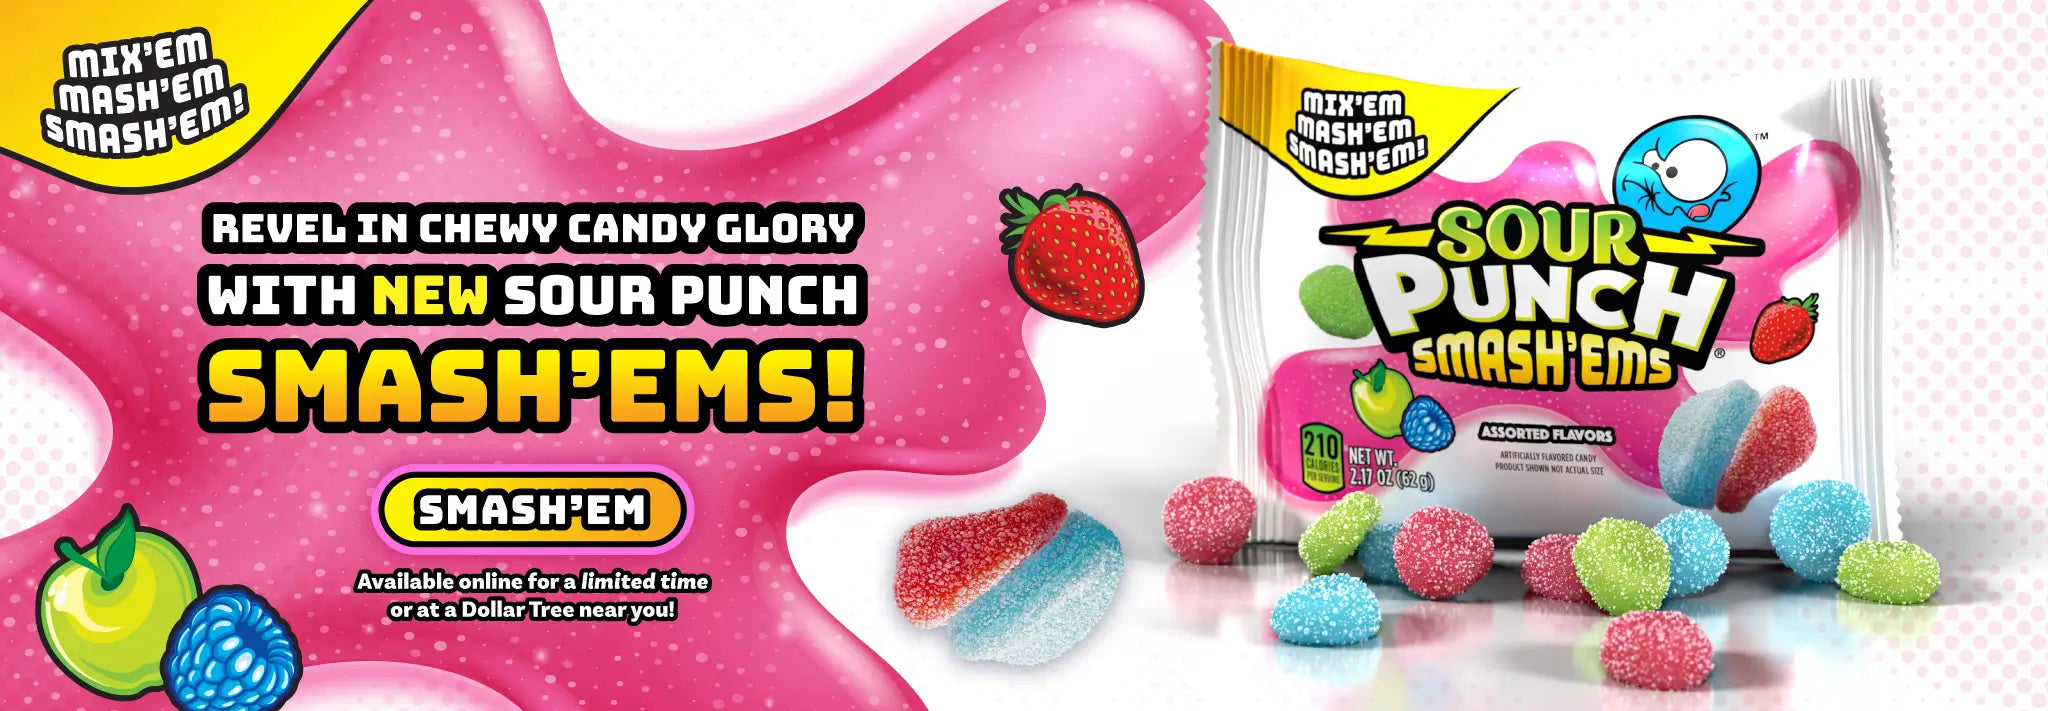 Revel in chewy candy glory with NEW Sour Punch Smash'ems! Available online for a limited time or at a Dollar Tree near you! Mix'em Mash'em Smash'em!